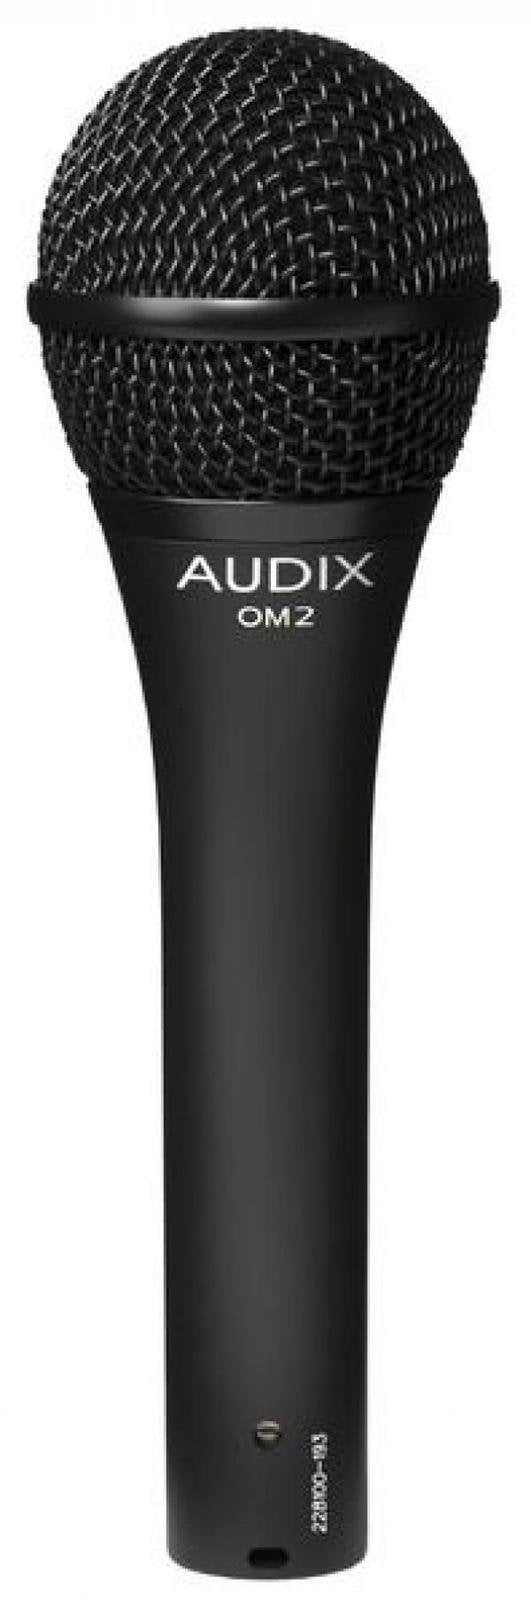 Vocal Dynamic Microphone AUDIX OM2-S Vocal Dynamic Microphone